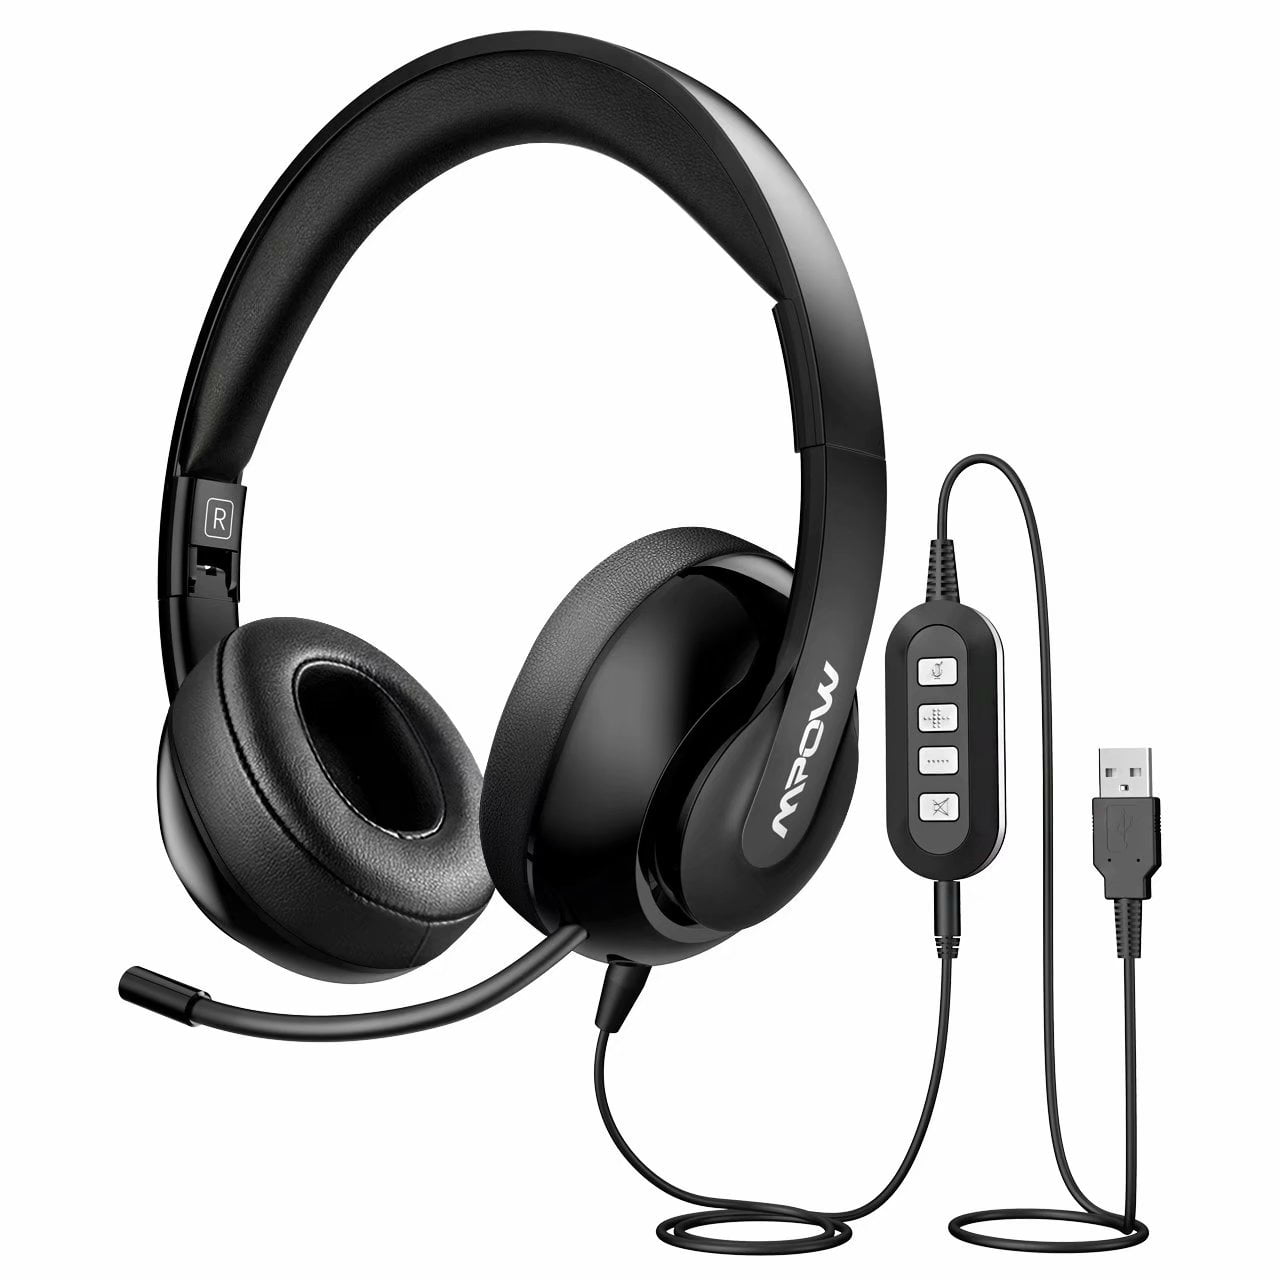 Mpow 3 5mm Usb Headsets Foldable Computer Headset With Mute Function Pc Headphones With Retractable Microphone Noise Canceling All Day Comfort For Meetings Call Center School Walmart Com Walmart Com